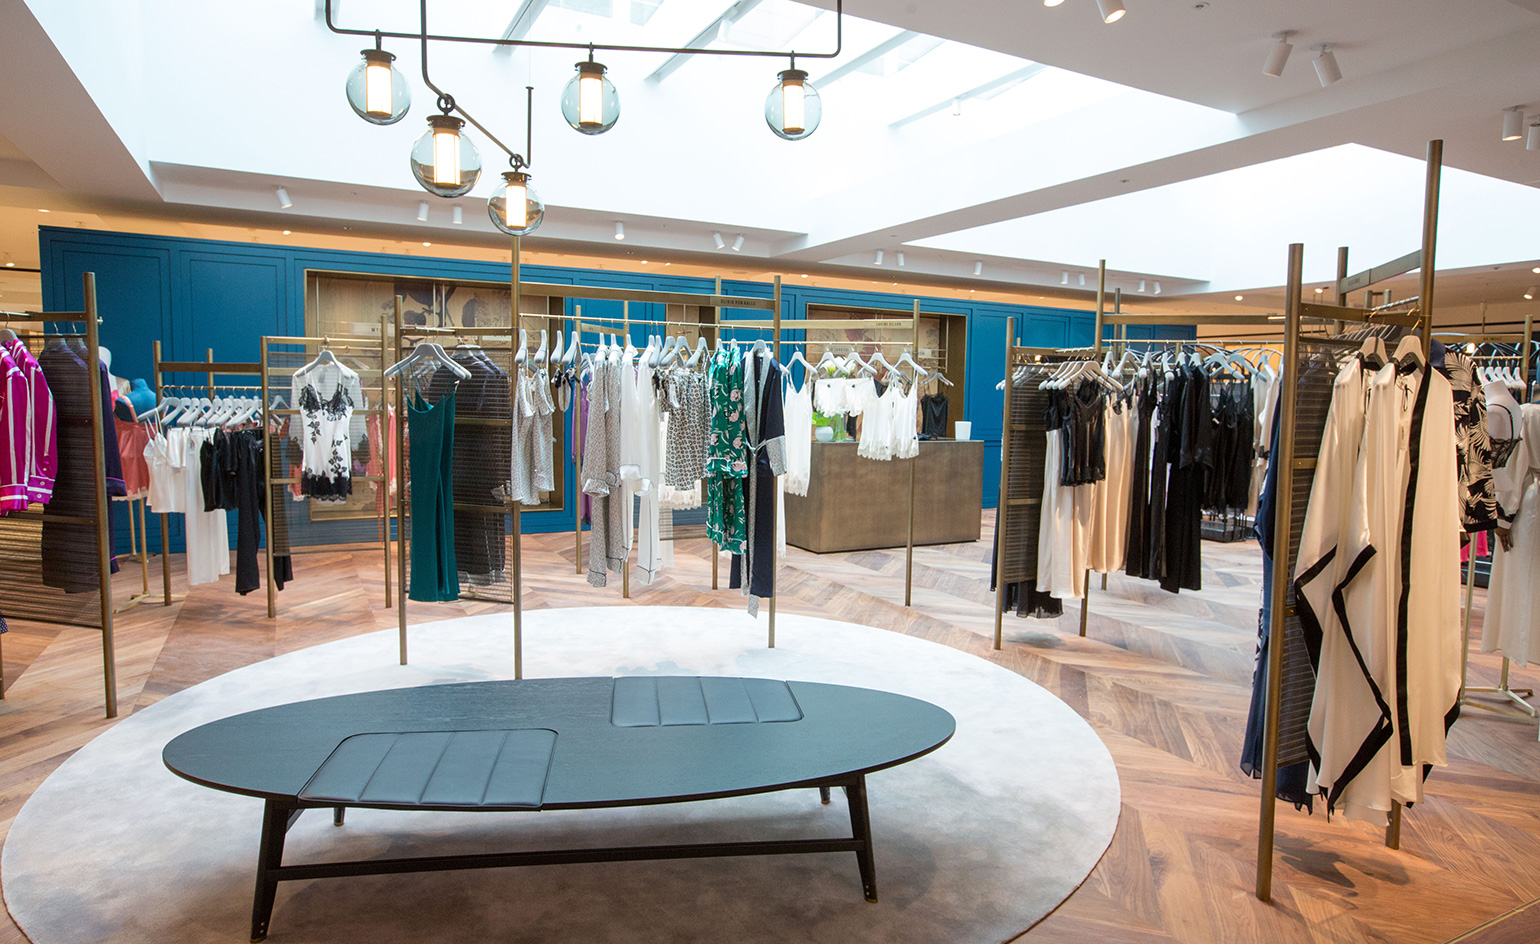 First Look: Inside the new Louis Vuitton townhouse concept at Selfridges